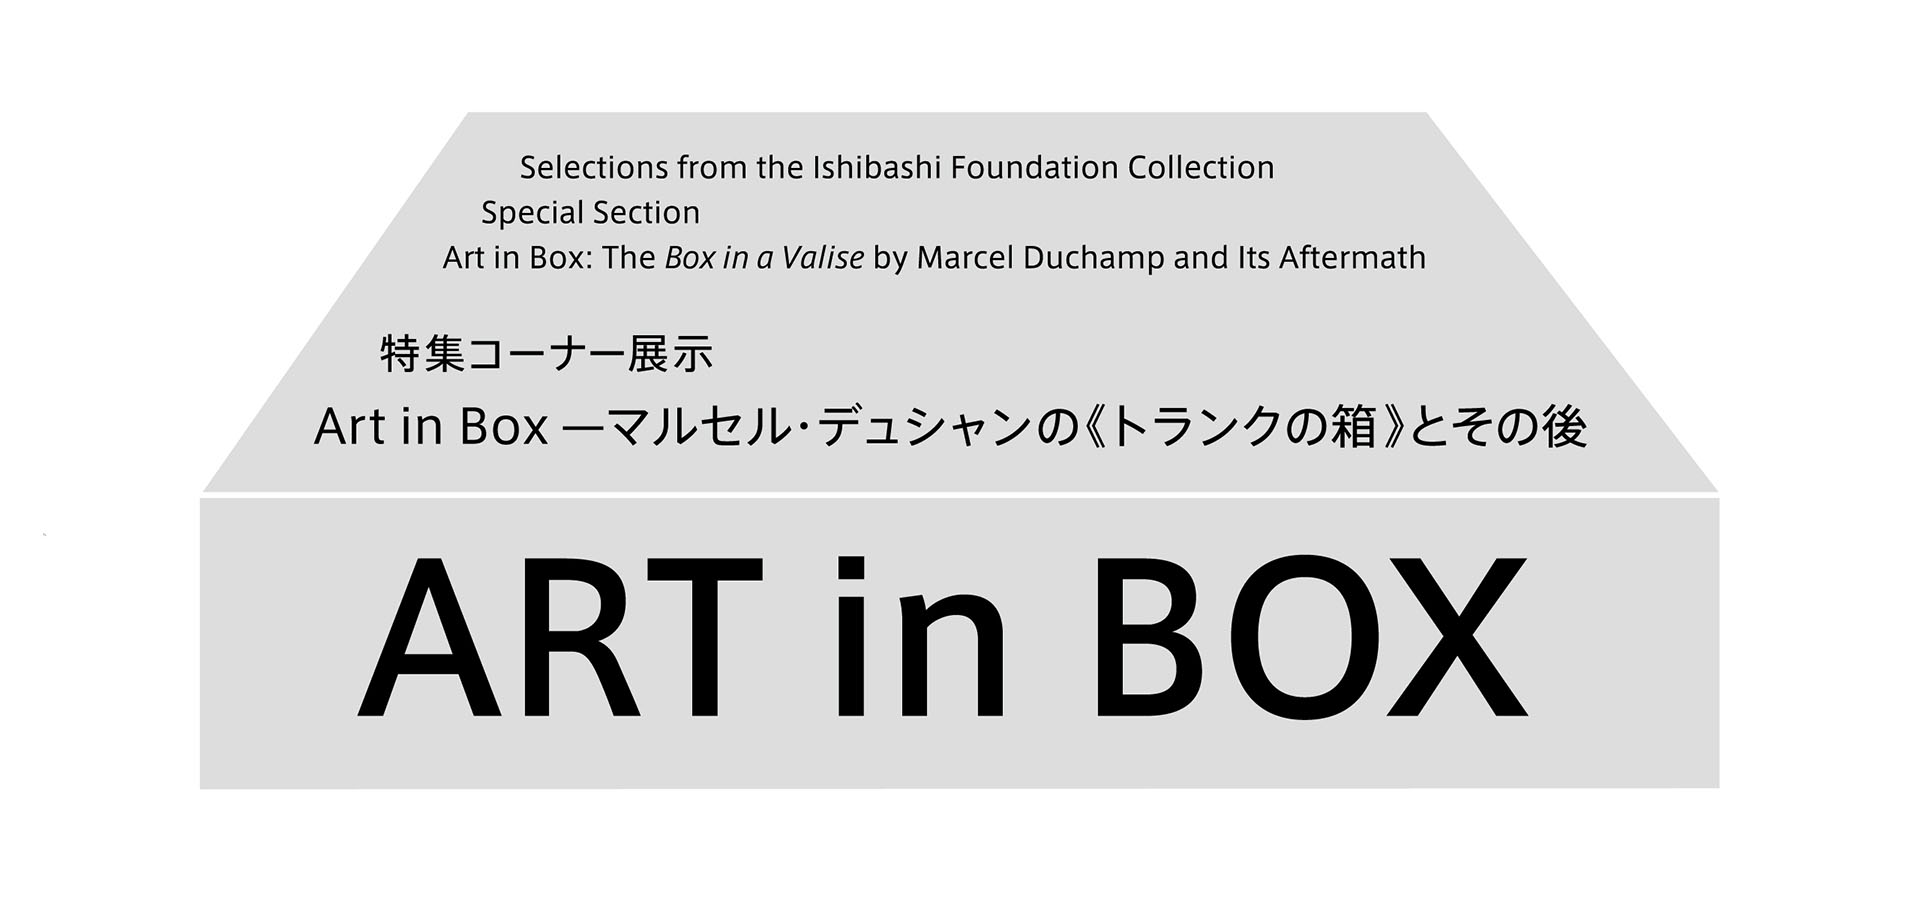 Selections from the Ishibashi Foundation Collection　Special Section　Art in Box: The Box in a Valise by Marcel Duchamp and Its Aftermath